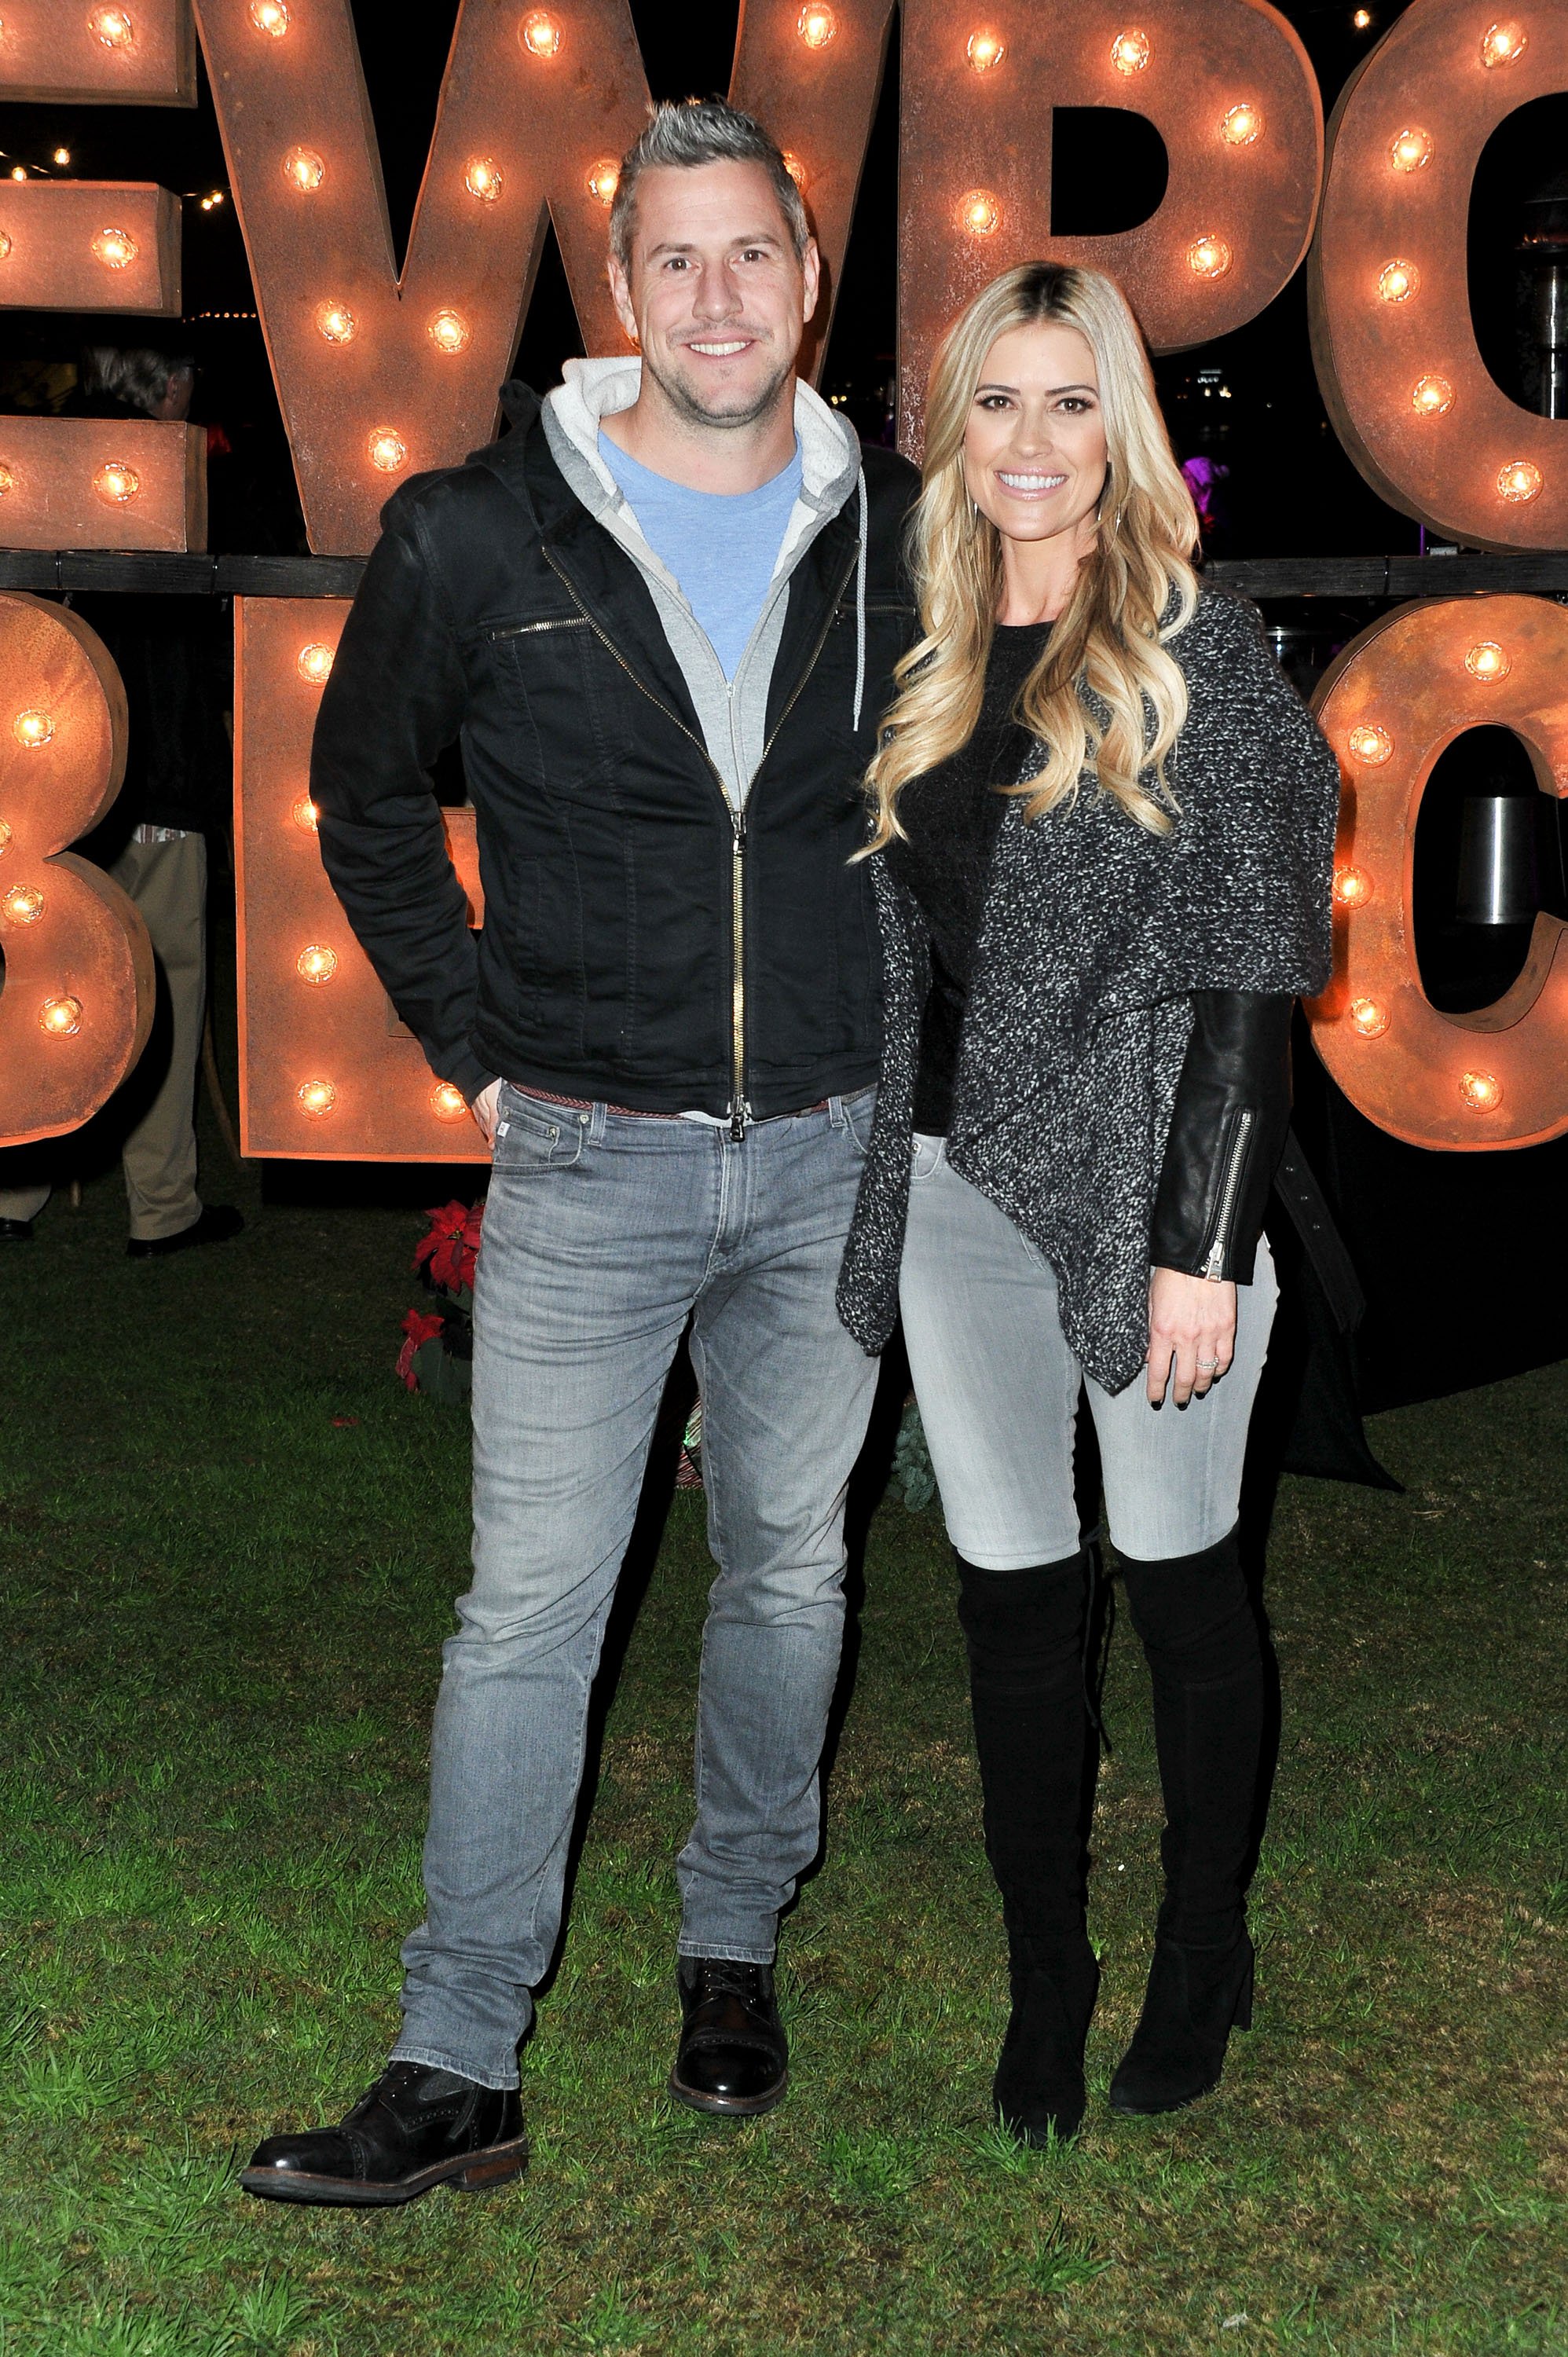 Christina Anstead and Ant Anstead attend the 111th Annual Newport Beach Christmas Boat Parade opening night on December 18, 2019. | Photo: Getty Images